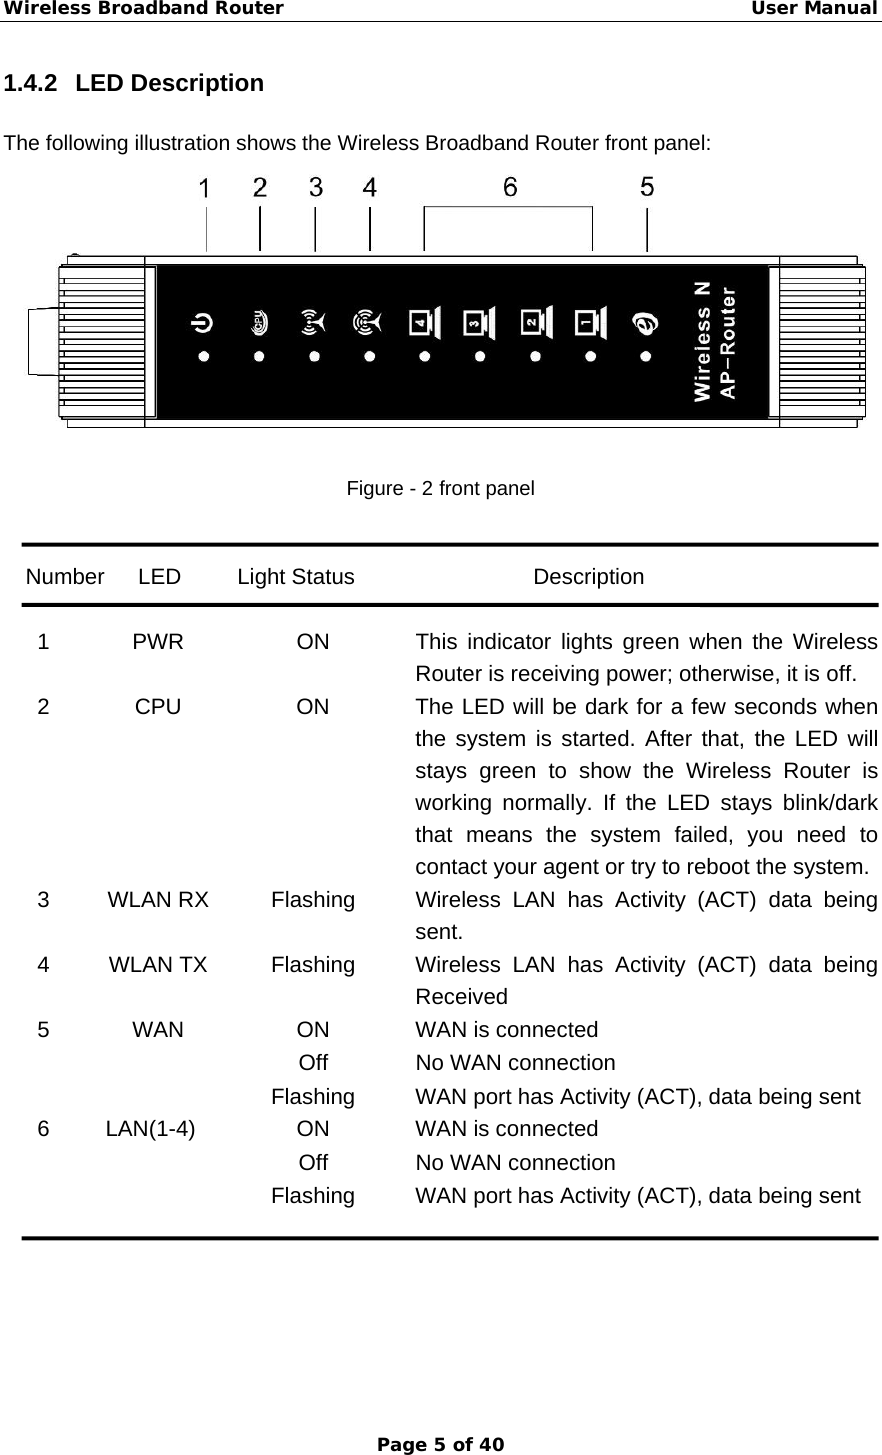 Wireless Broadband Router                                                   User Manual Page 5 of 40 1.4.2 LED Description The following illustration shows the Wireless Broadband Router front panel:  Figure - 2 front panel   Number   LED     Light Status                Description  1  PWR  ON  This indicator lights green when the Wireless Router is receiving power; otherwise, it is off. 2  CPU  ON  The LED will be dark for a few seconds when the system is started. After that, the LED will stays green to show the Wireless Router is working normally. If the LED stays blink/dark that means the system failed, you need to contact your agent or try to reboot the system. 3  WLAN RX  Flashing  Wireless LAN has Activity (ACT) data being sent. 4  WLAN TX  Flashing  Wireless LAN has Activity (ACT) data being Received 5  WAN  ON  WAN is connected Off  No WAN connection  Flashing  WAN port has Activity (ACT), data being sent 6  LAN(1-4)  ON  WAN is connected Off  No WAN connection  Flashing  WAN port has Activity (ACT), data being sent   